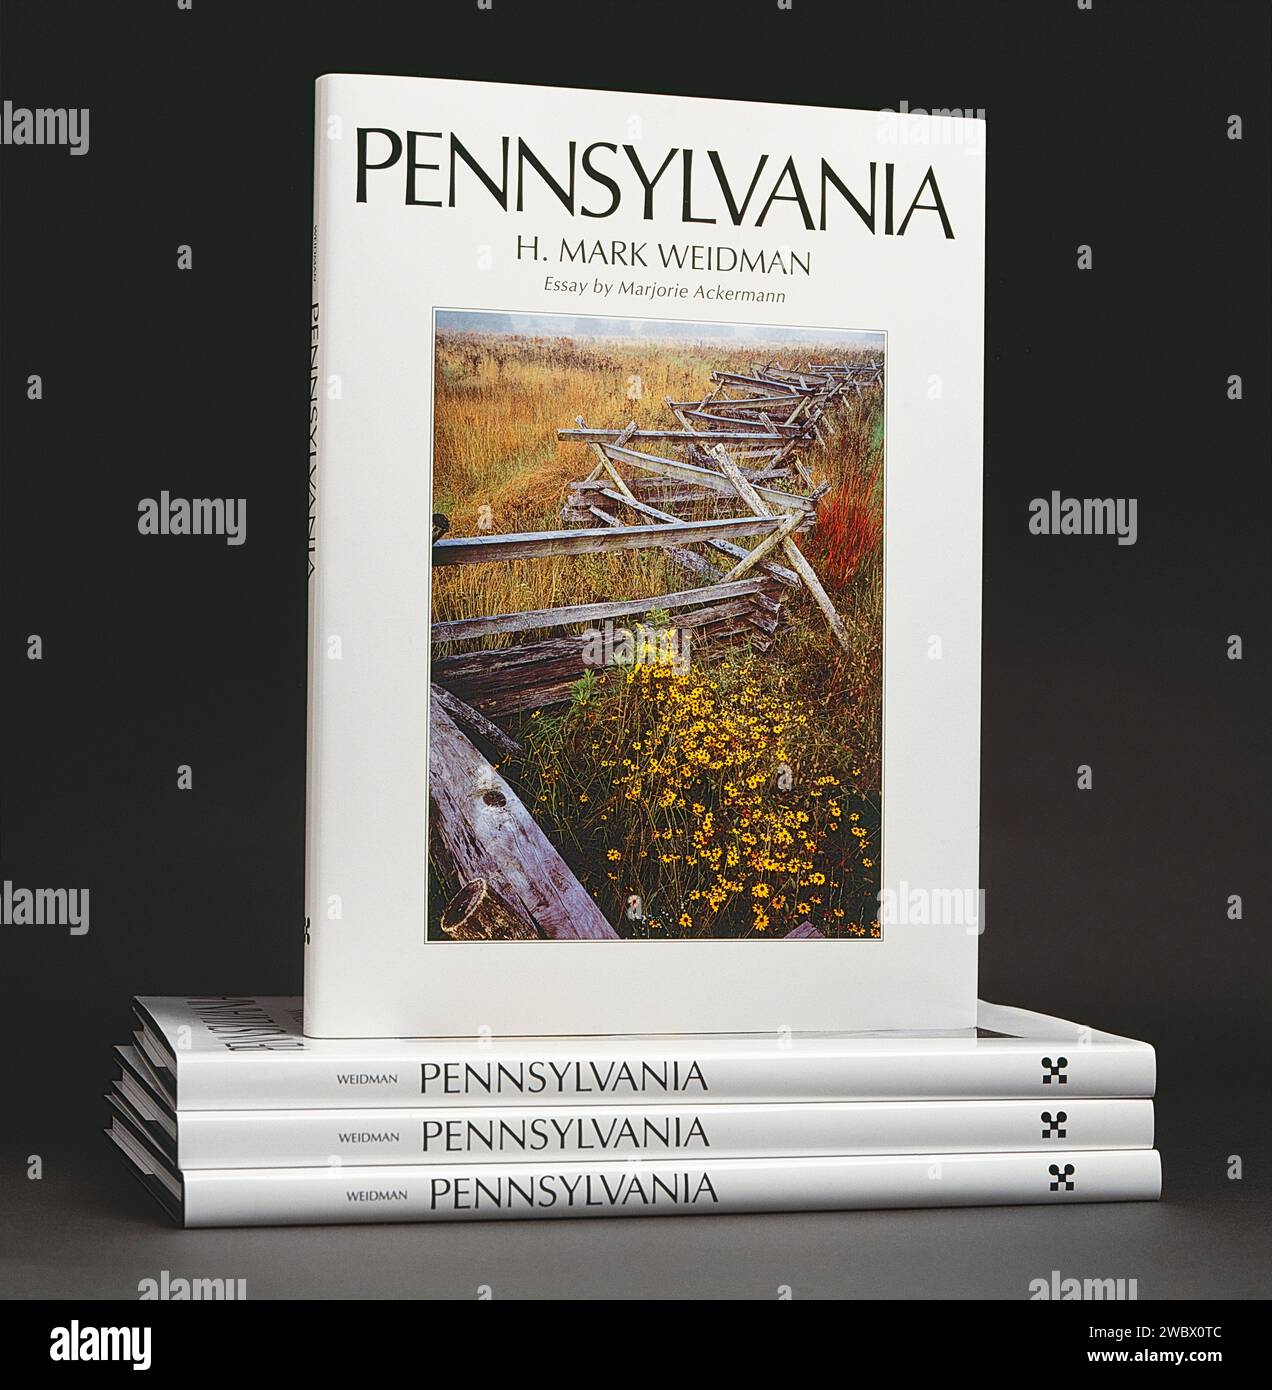 Coffee-table book, Pennsylvania, by H. Mark Weidman Photographer & Marjorie Ackermann; Graphic Arts Center Publishing Company Stock Photo